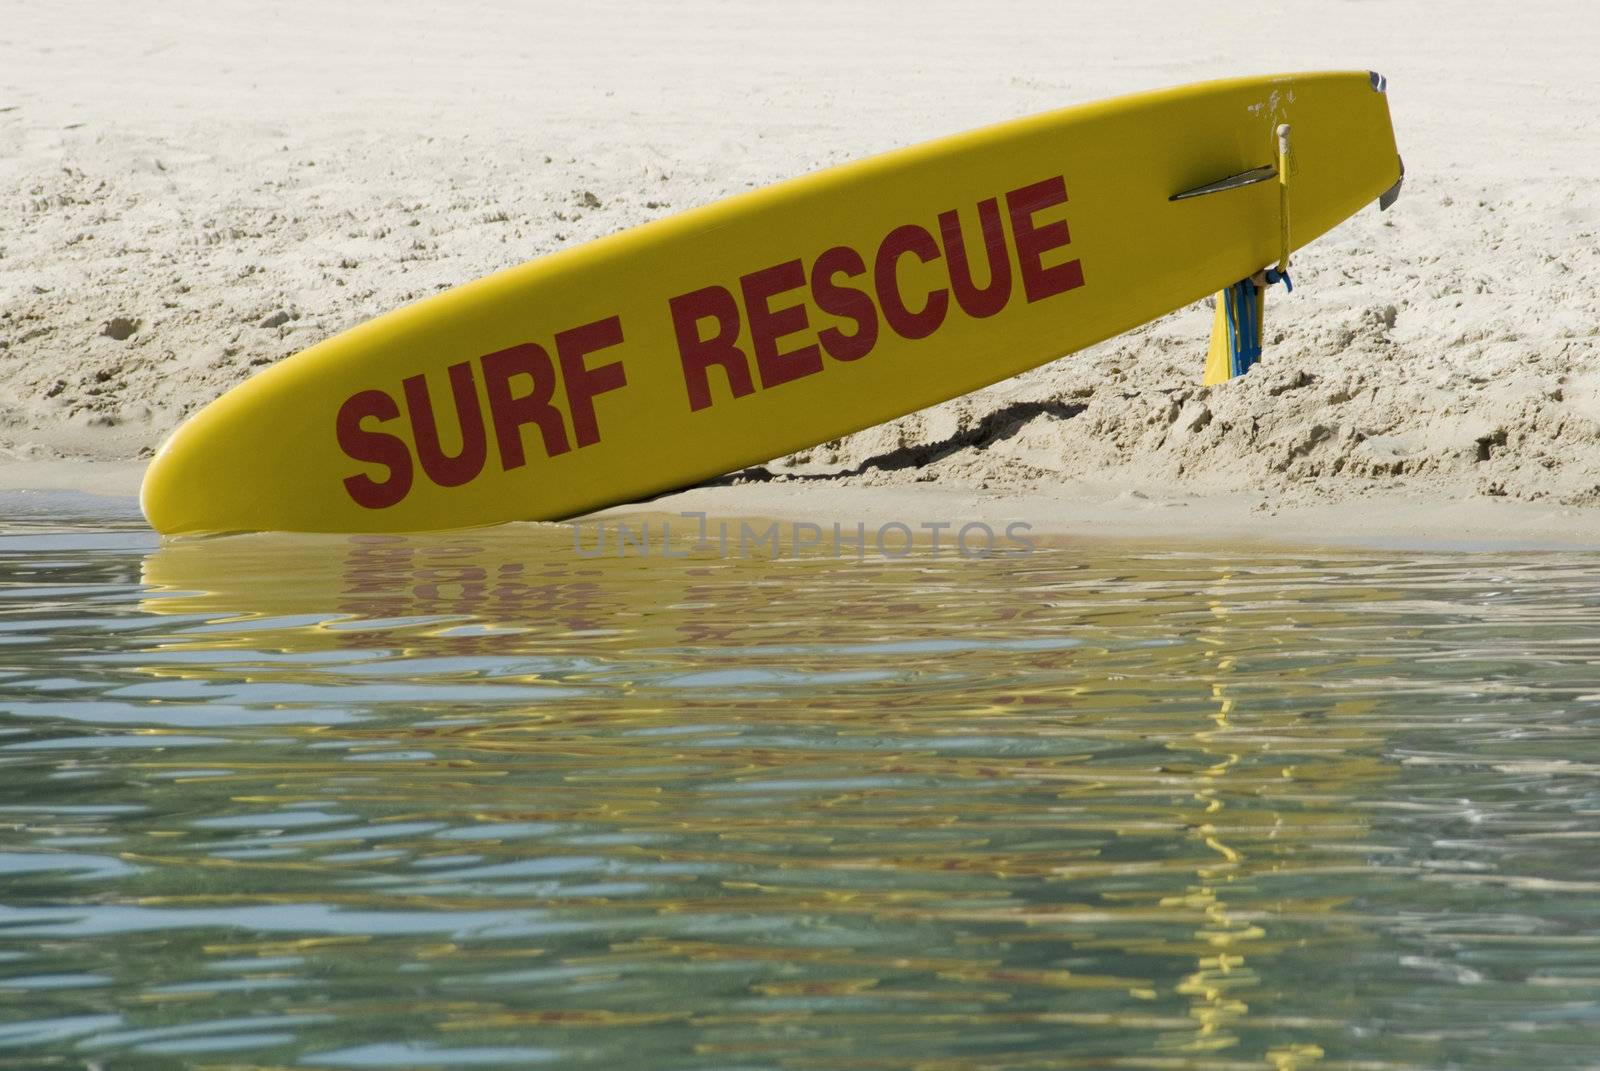 A bright yellow surfboard, standing by for use by surf rescue